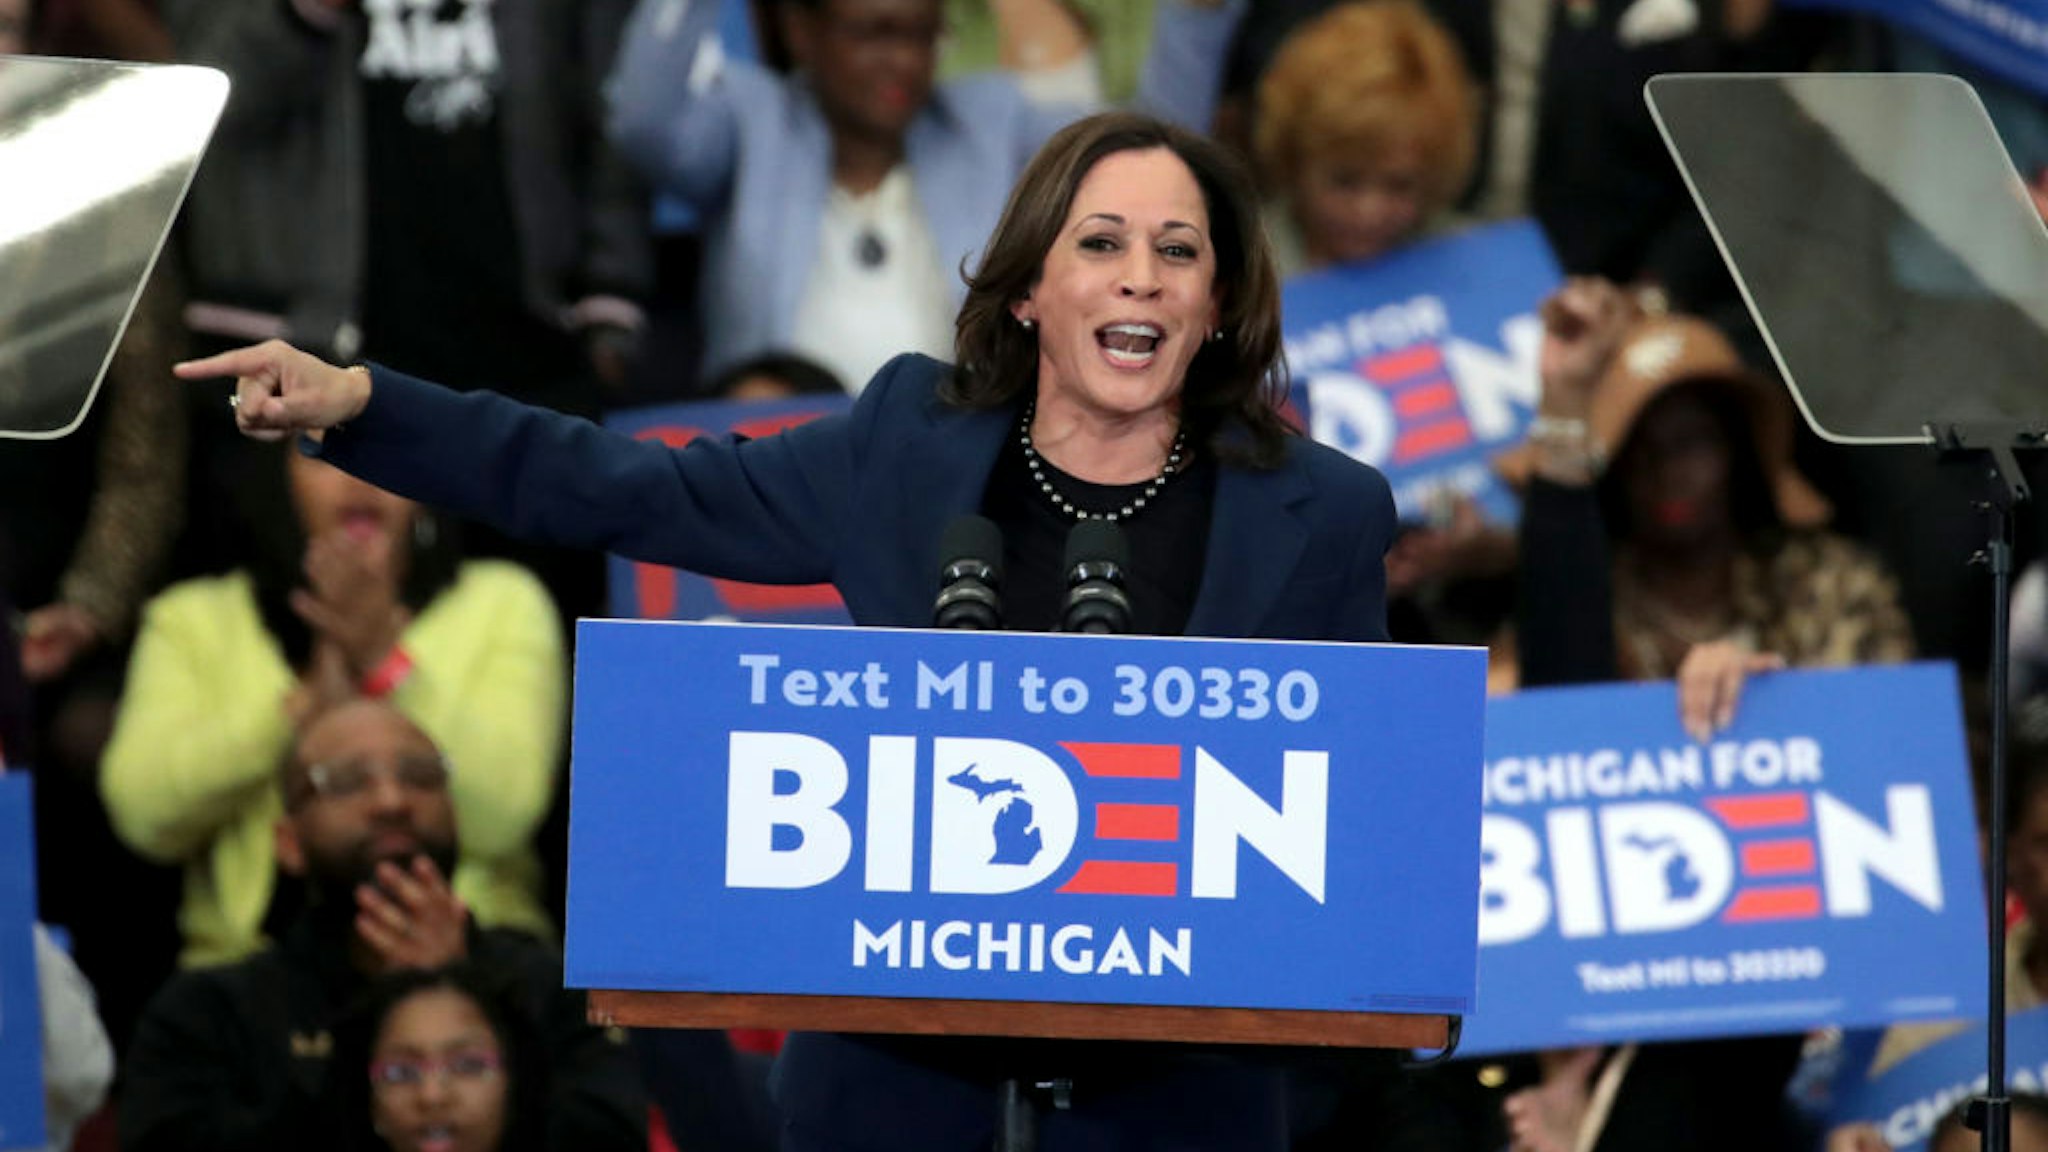 DETROIT, MICHIGAN - MARCH 09: Sen. Kamala Harris (D-CA) introduces Democratic presidential candidate former Vice President Joe Biden at a campaign rally at Renaissance High School on March 09, 2020 in Detroit, Michigan. Michigan will hold its primary election tomorrow. (Photo by Scott Olson/Getty Images)